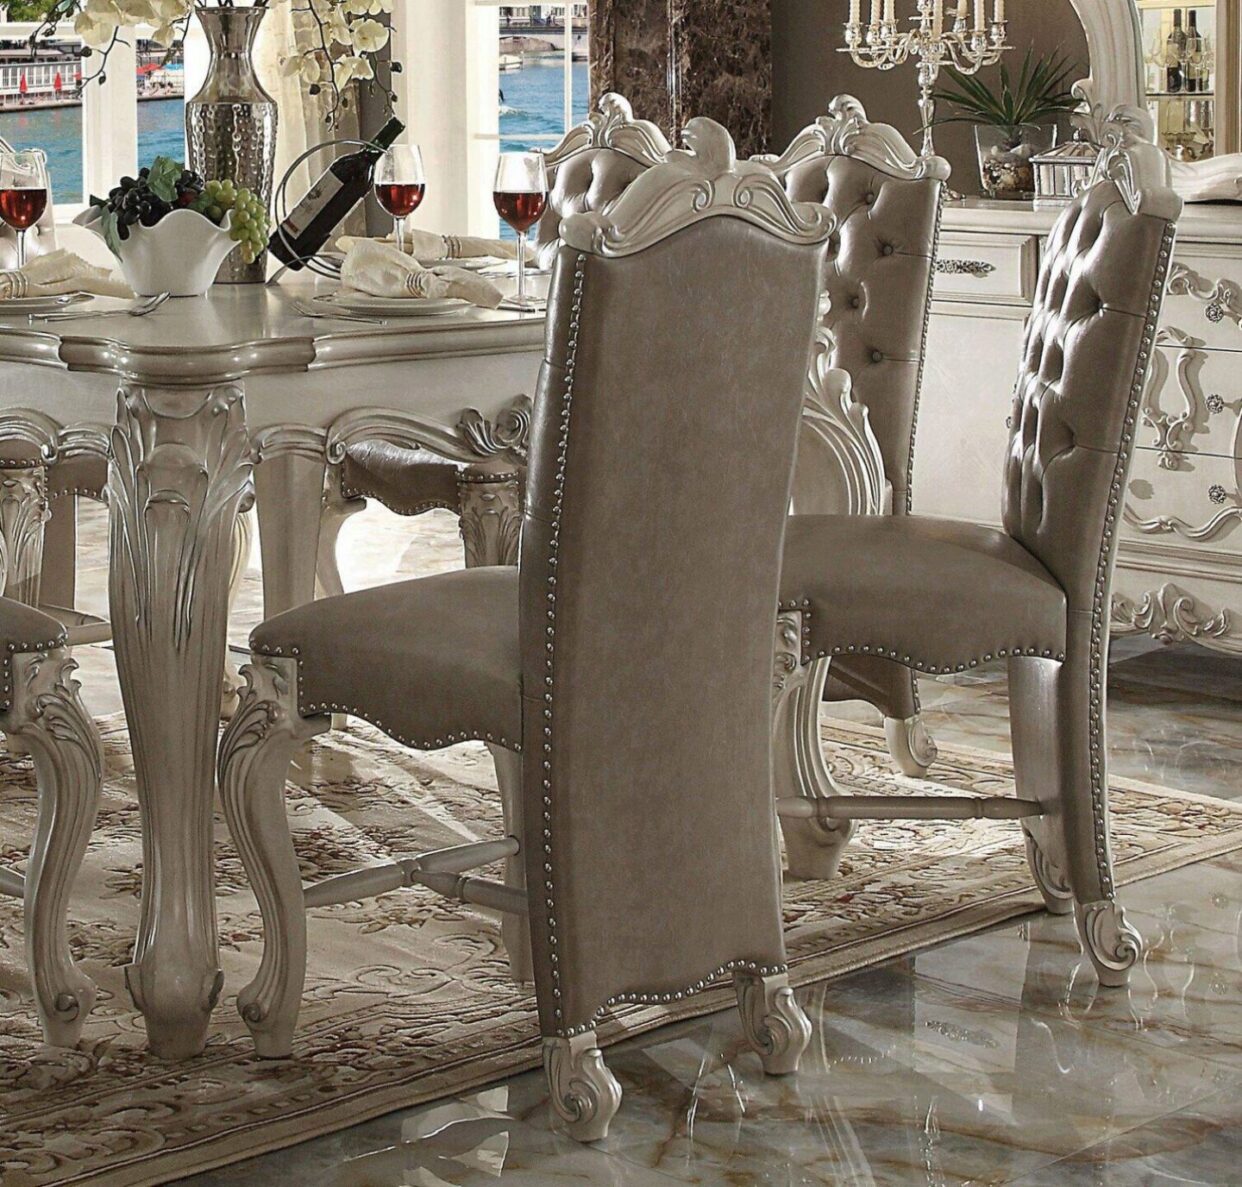 Acme 61150 Versailles Dining Collection - Bone White